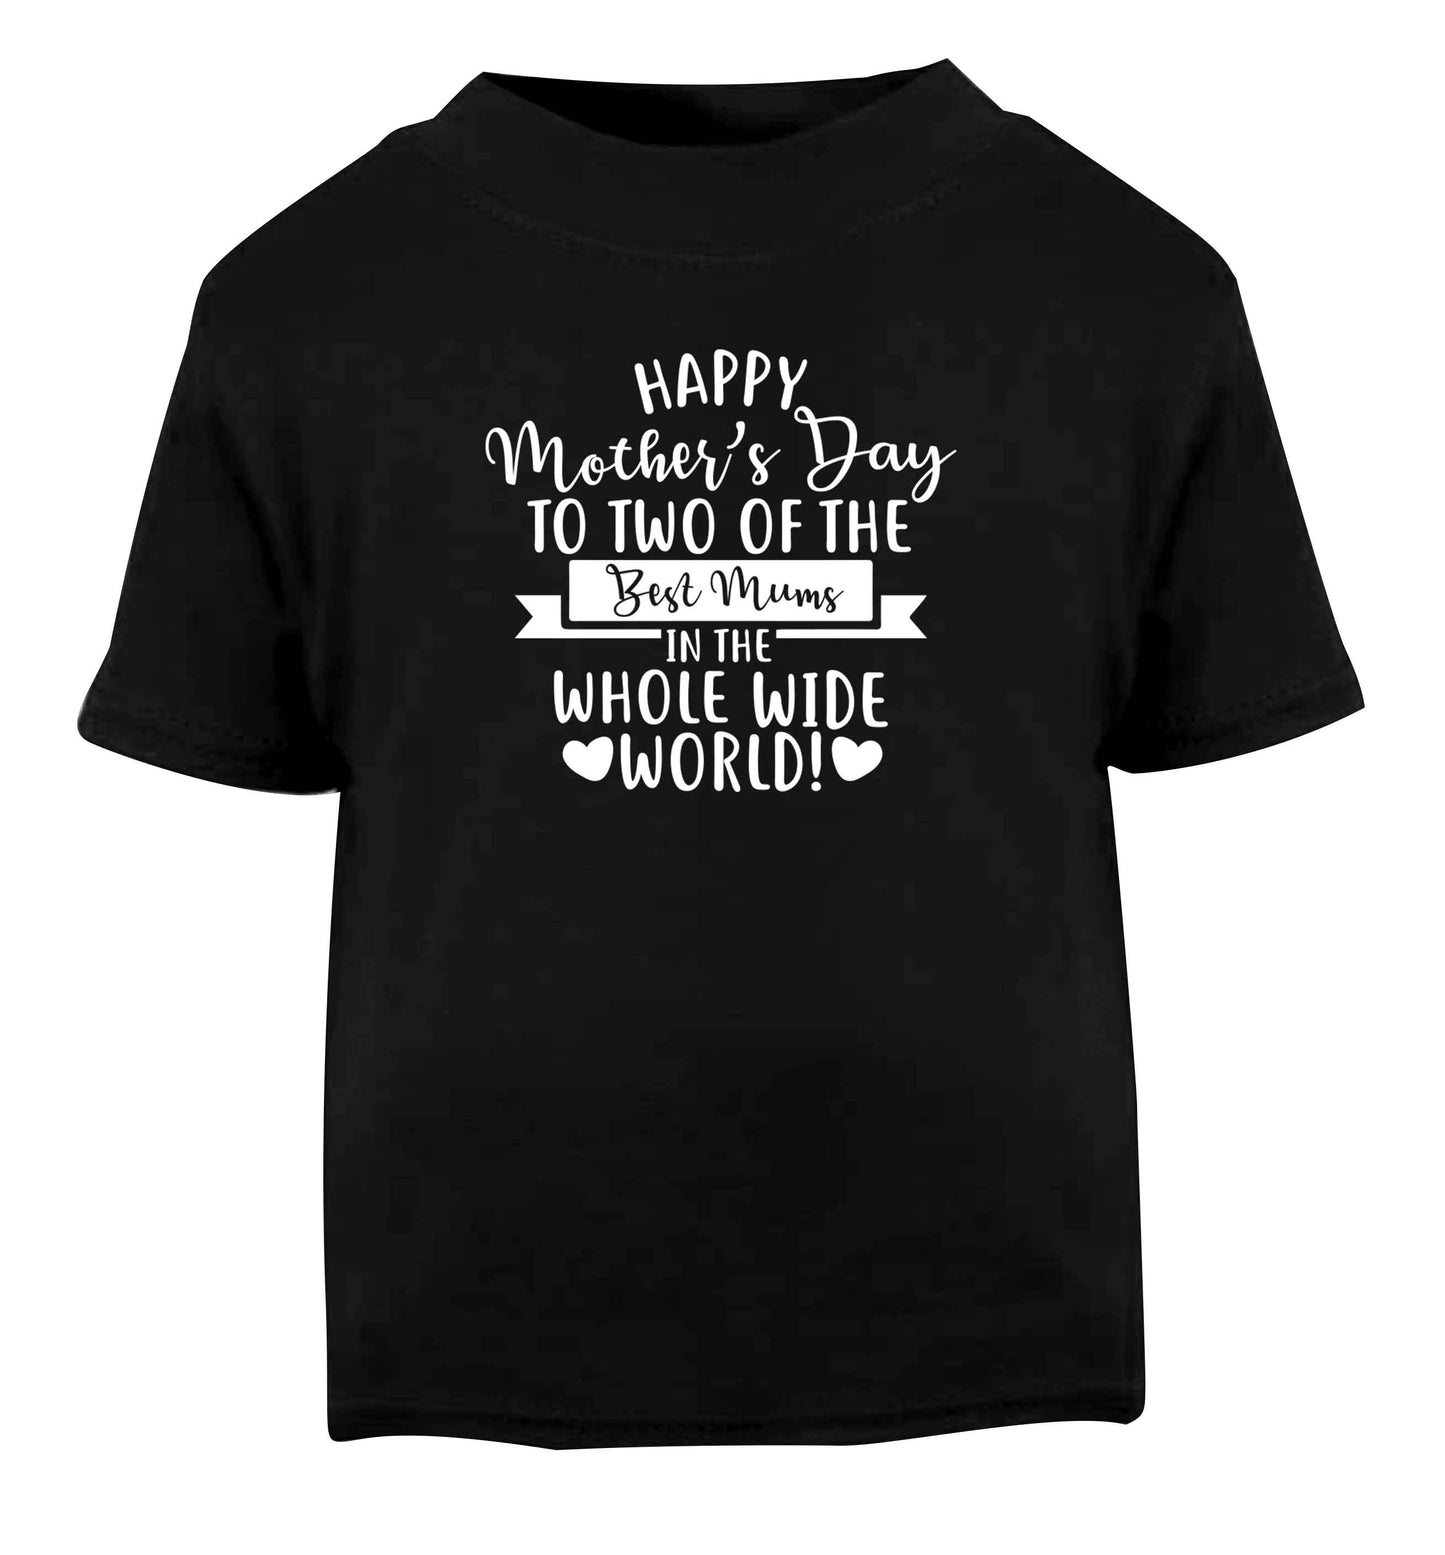 Happy mother's day to two of the best mums in the whole wide world Black baby toddler Tshirt 2 years